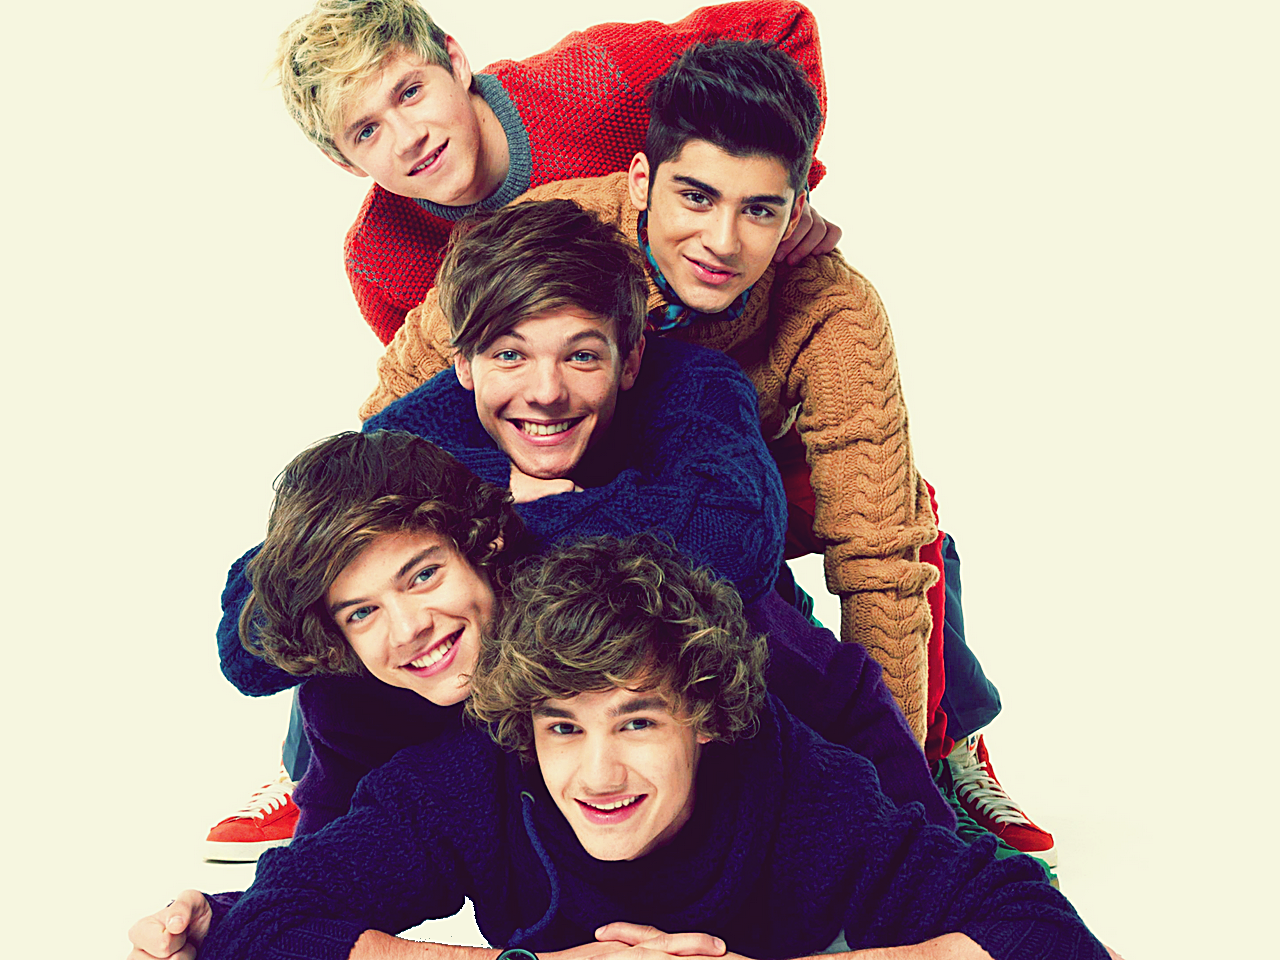 1d One Direction Photo